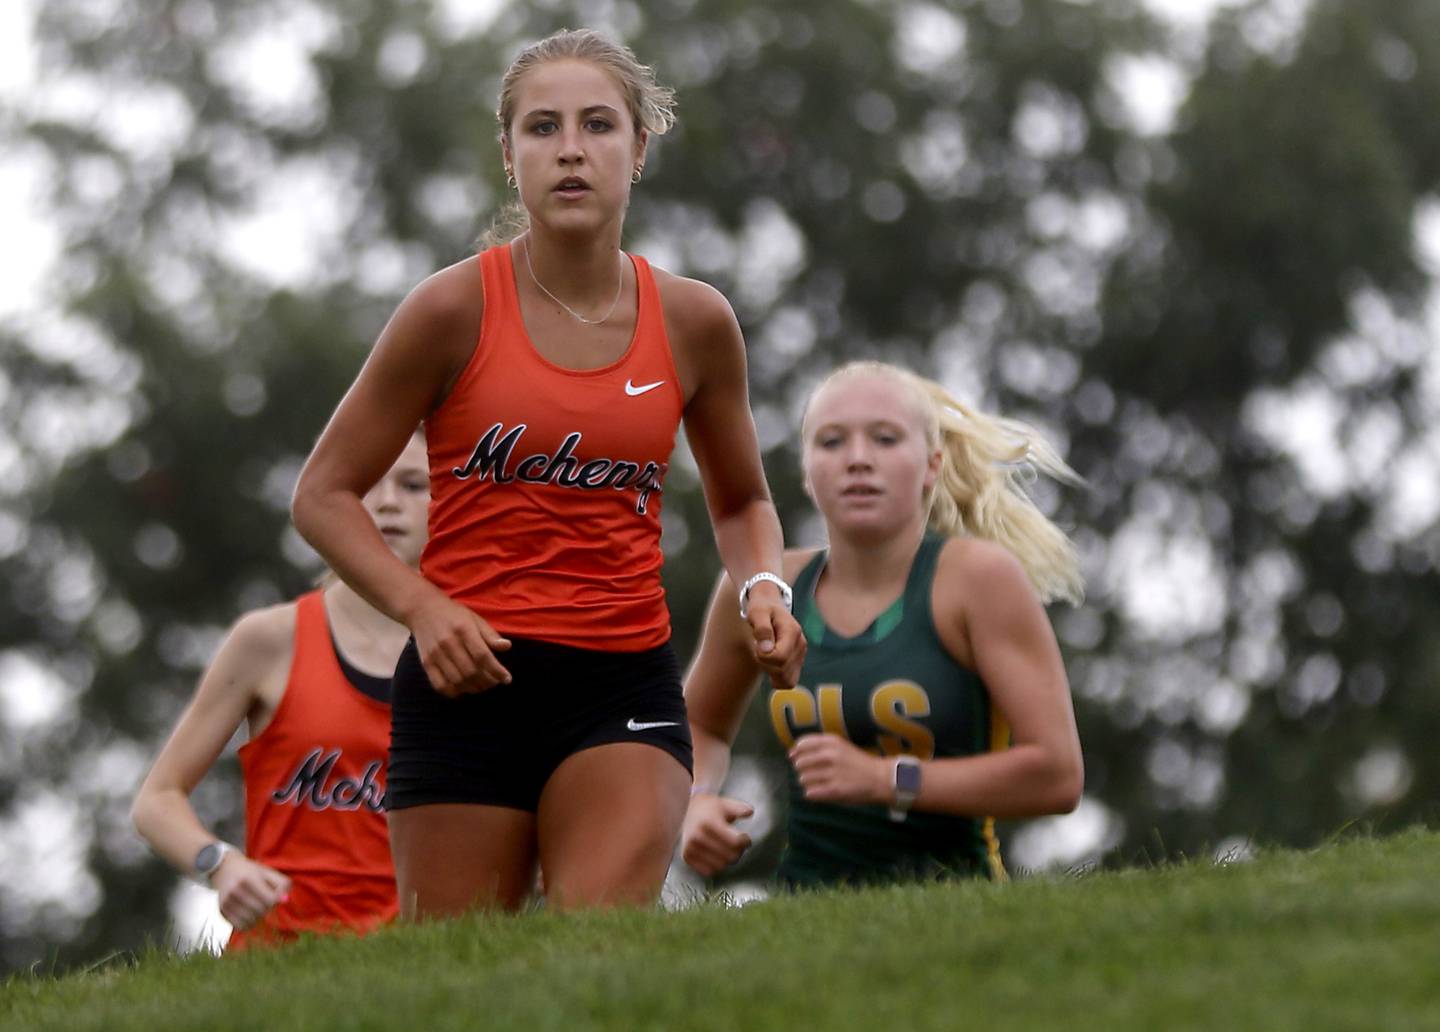 McHenry’s Danielle Jensen (center) leads the girls race of the McHenry County Cross Country Meet in front of her teammate, Skyler Balzer, and Crystal Lake South’s Abby Machesky on Saturday, August 27, 2022, at Emricson Park in Woodstock.